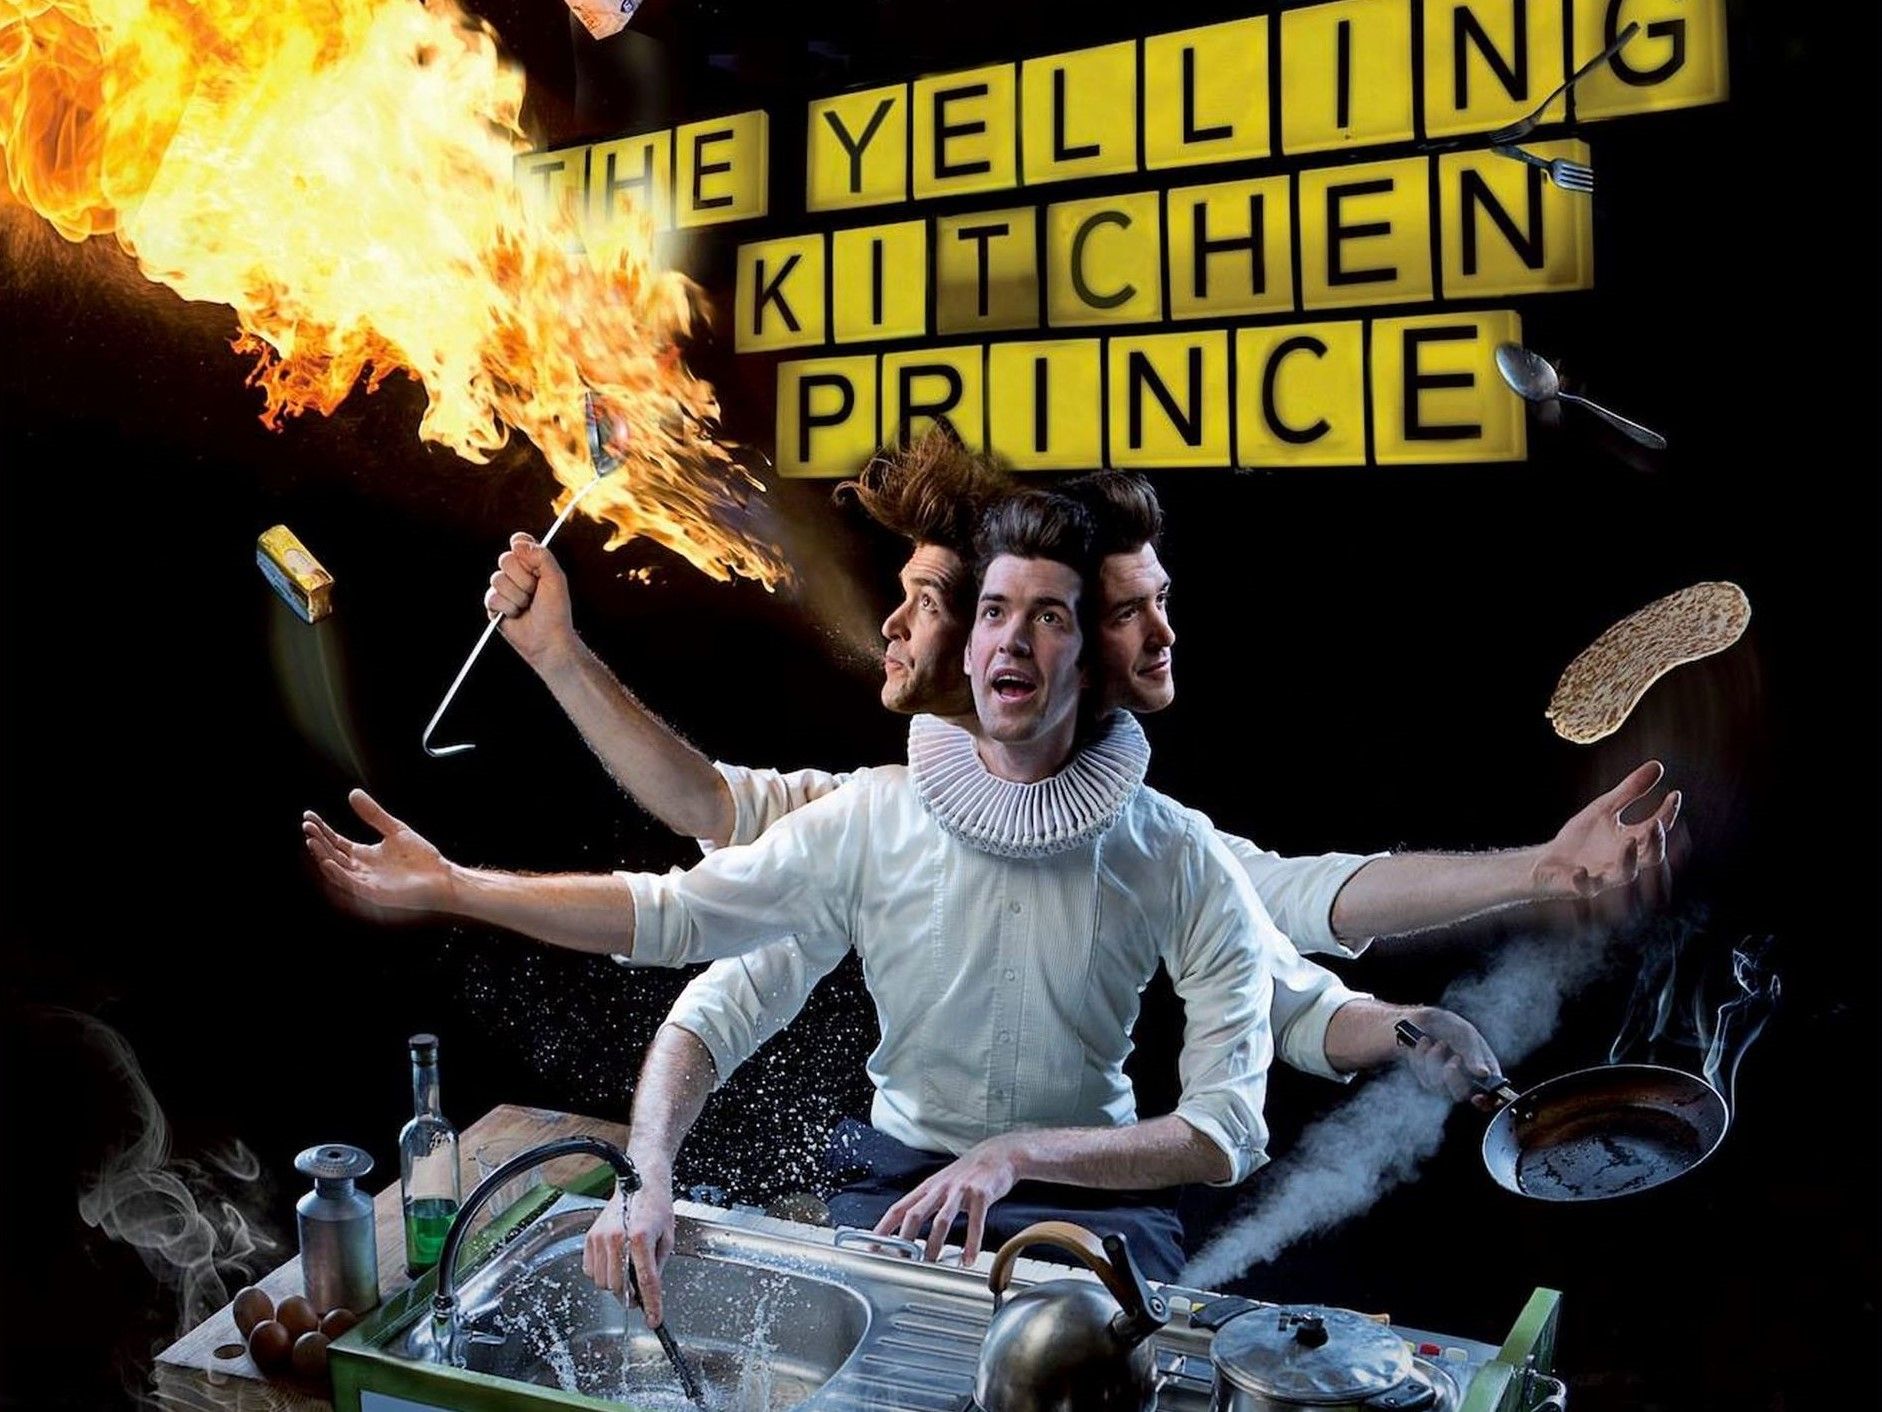 The Yelling Kitchen Prince